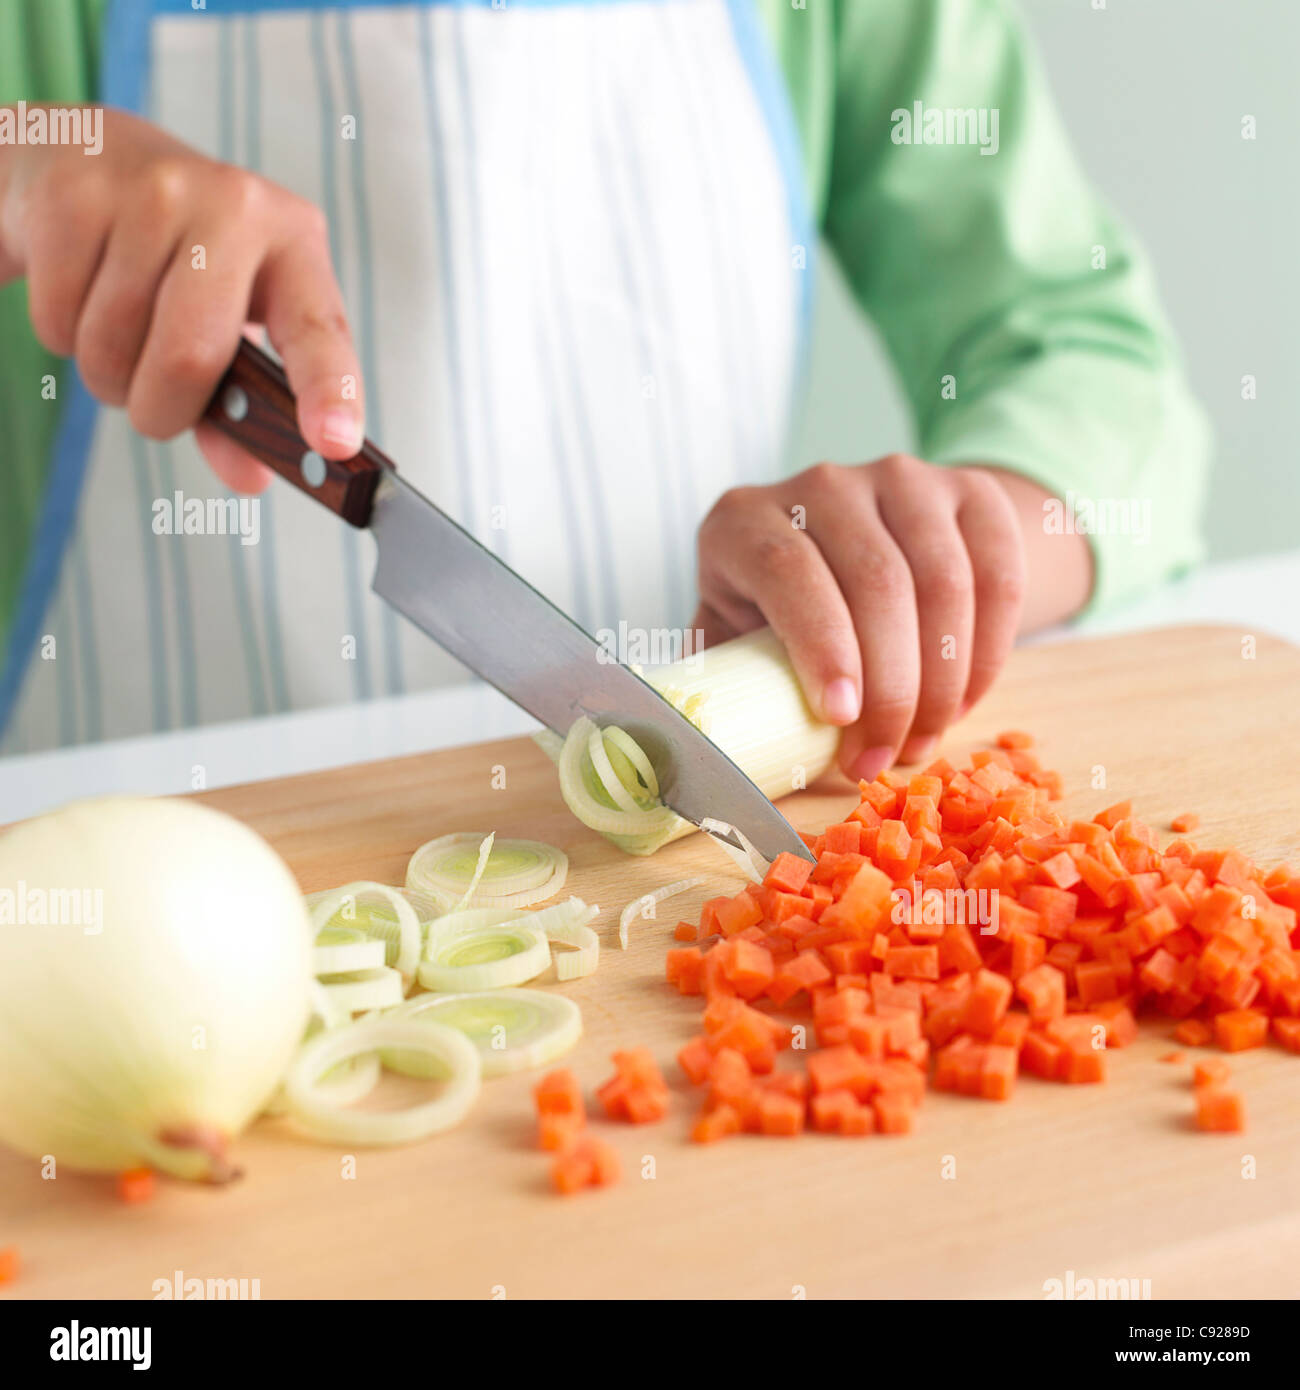 Chopping vegetables stock image. Image of vegetables - 24558805